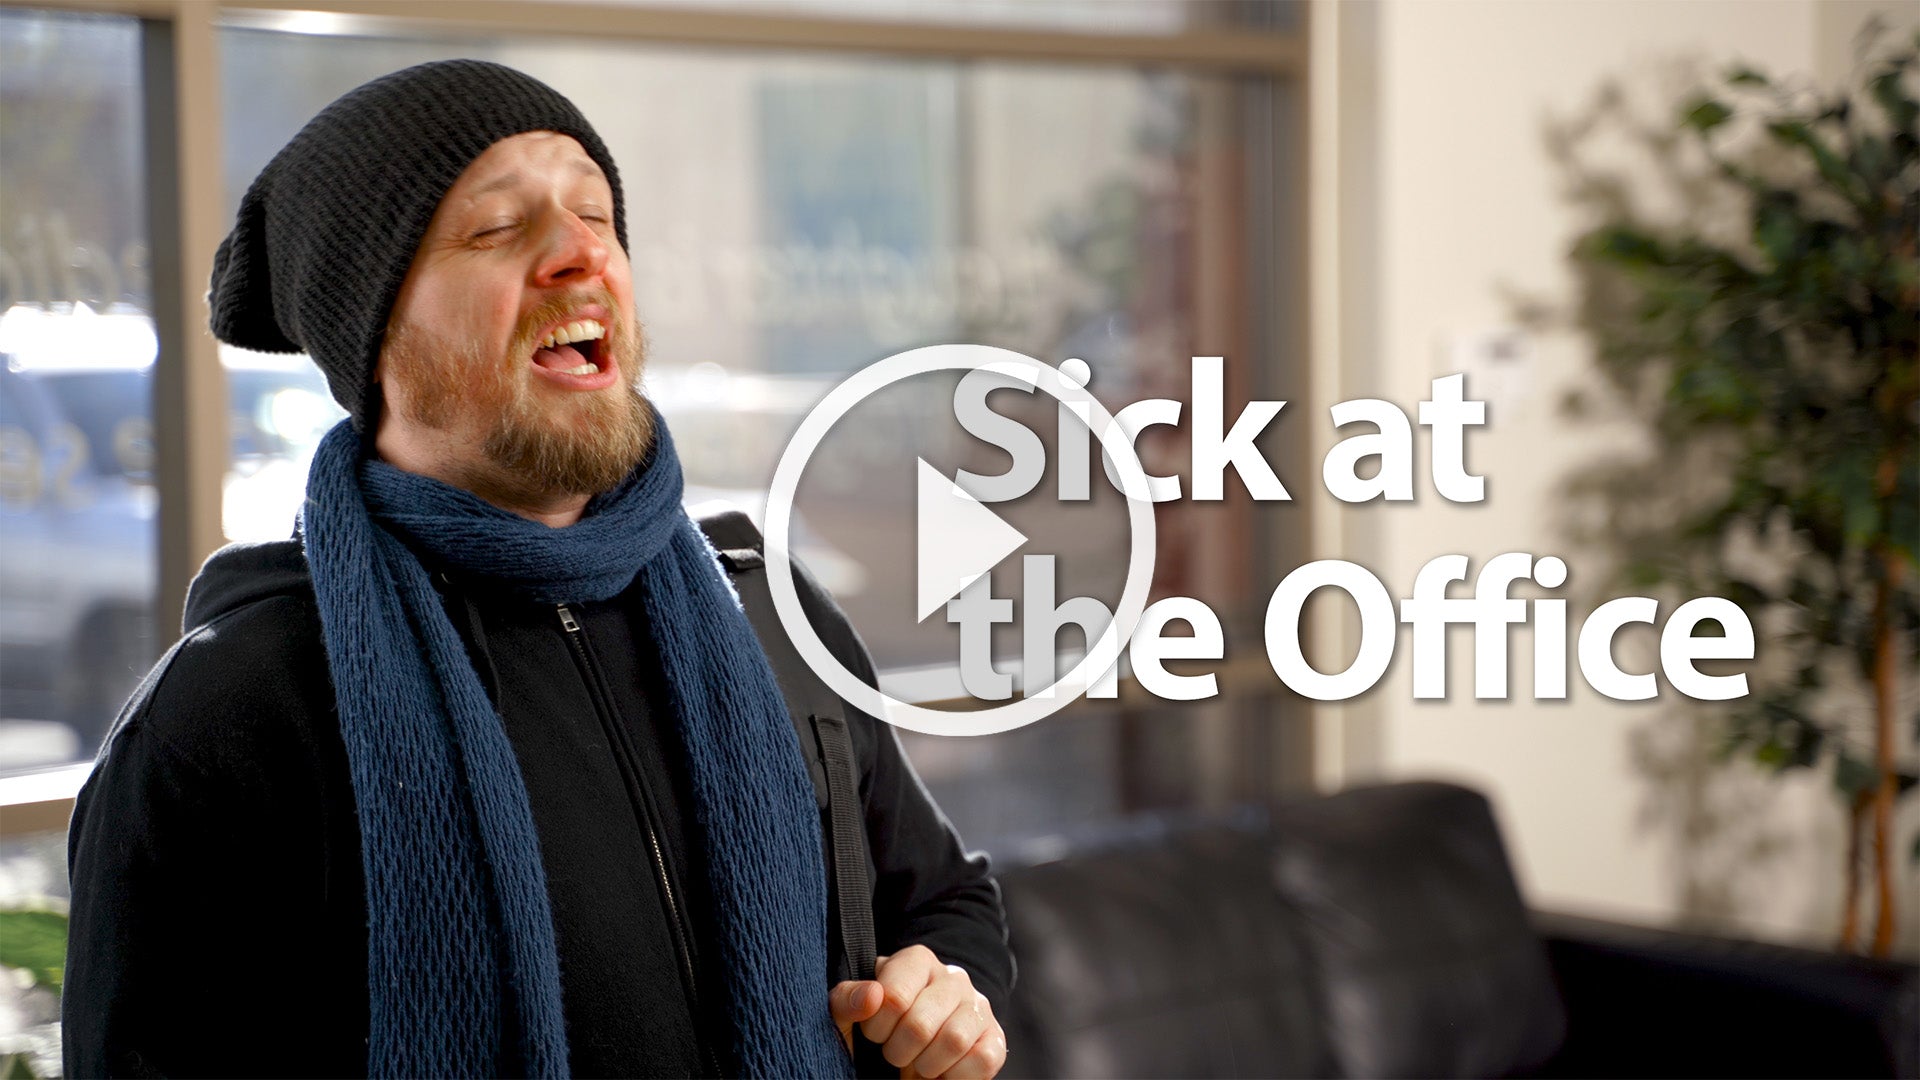 Sick at the Office | #FunnyFriday